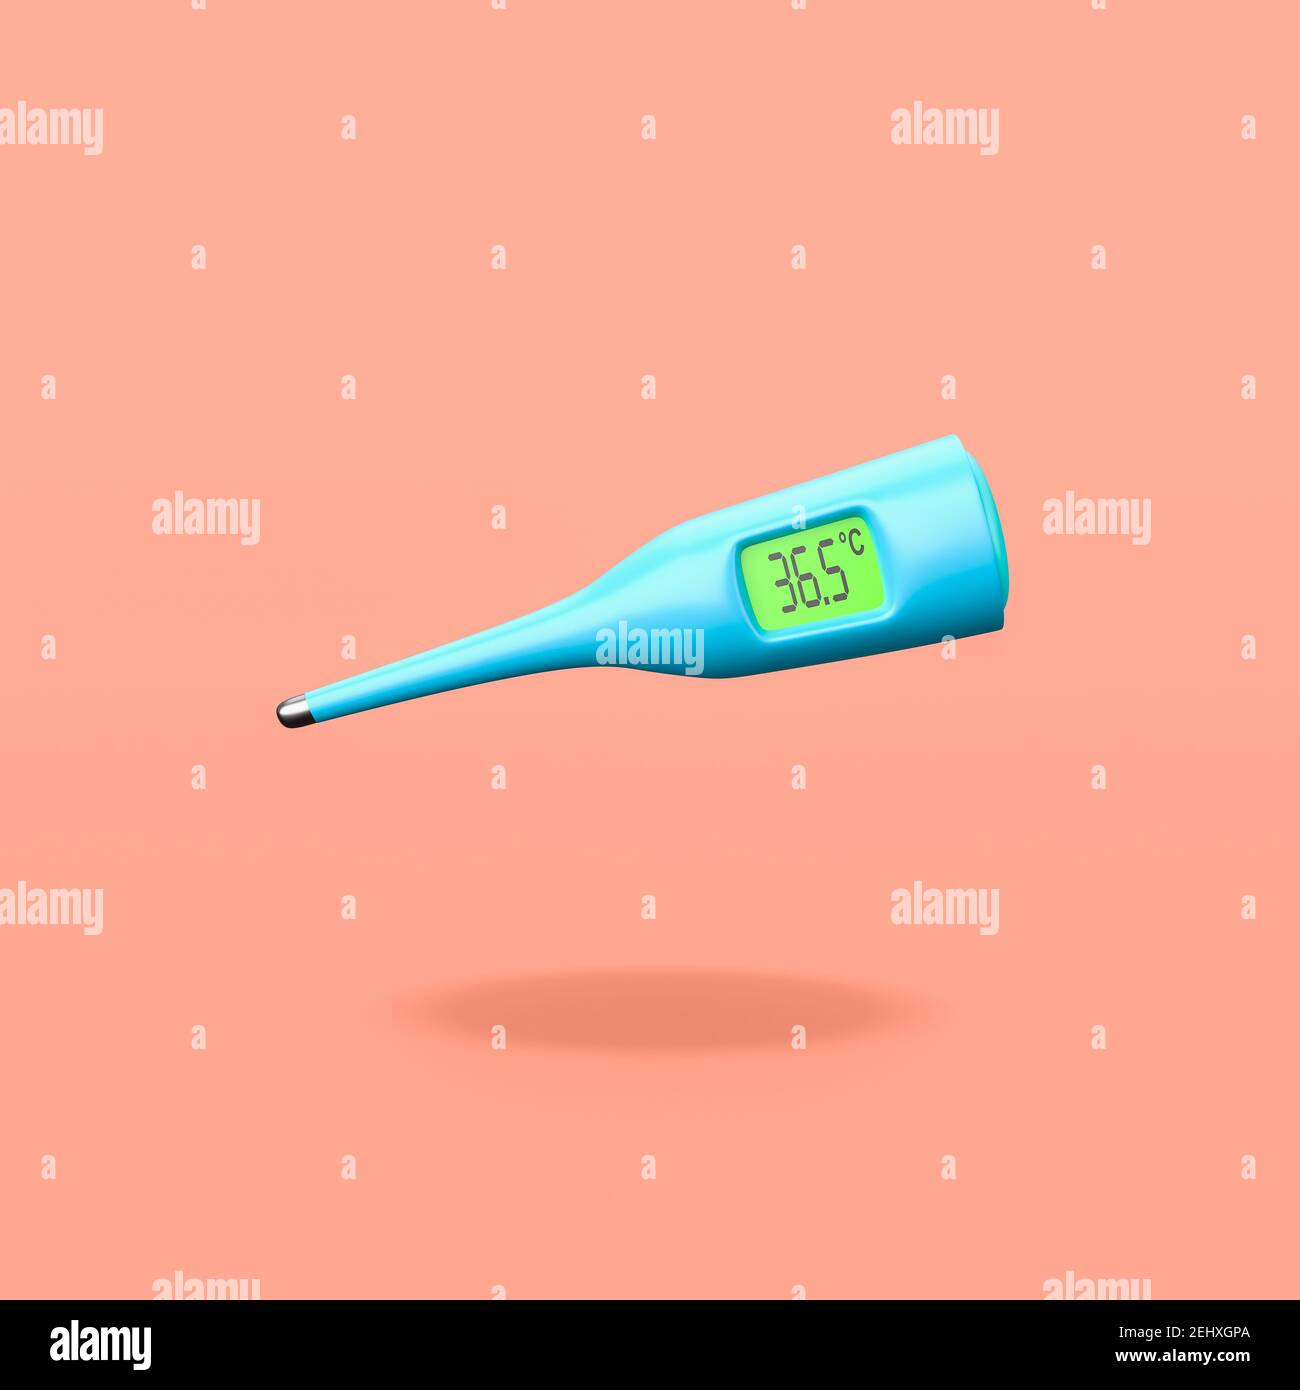 Clinical Digital Thermometer on Orange Background Stock Photo